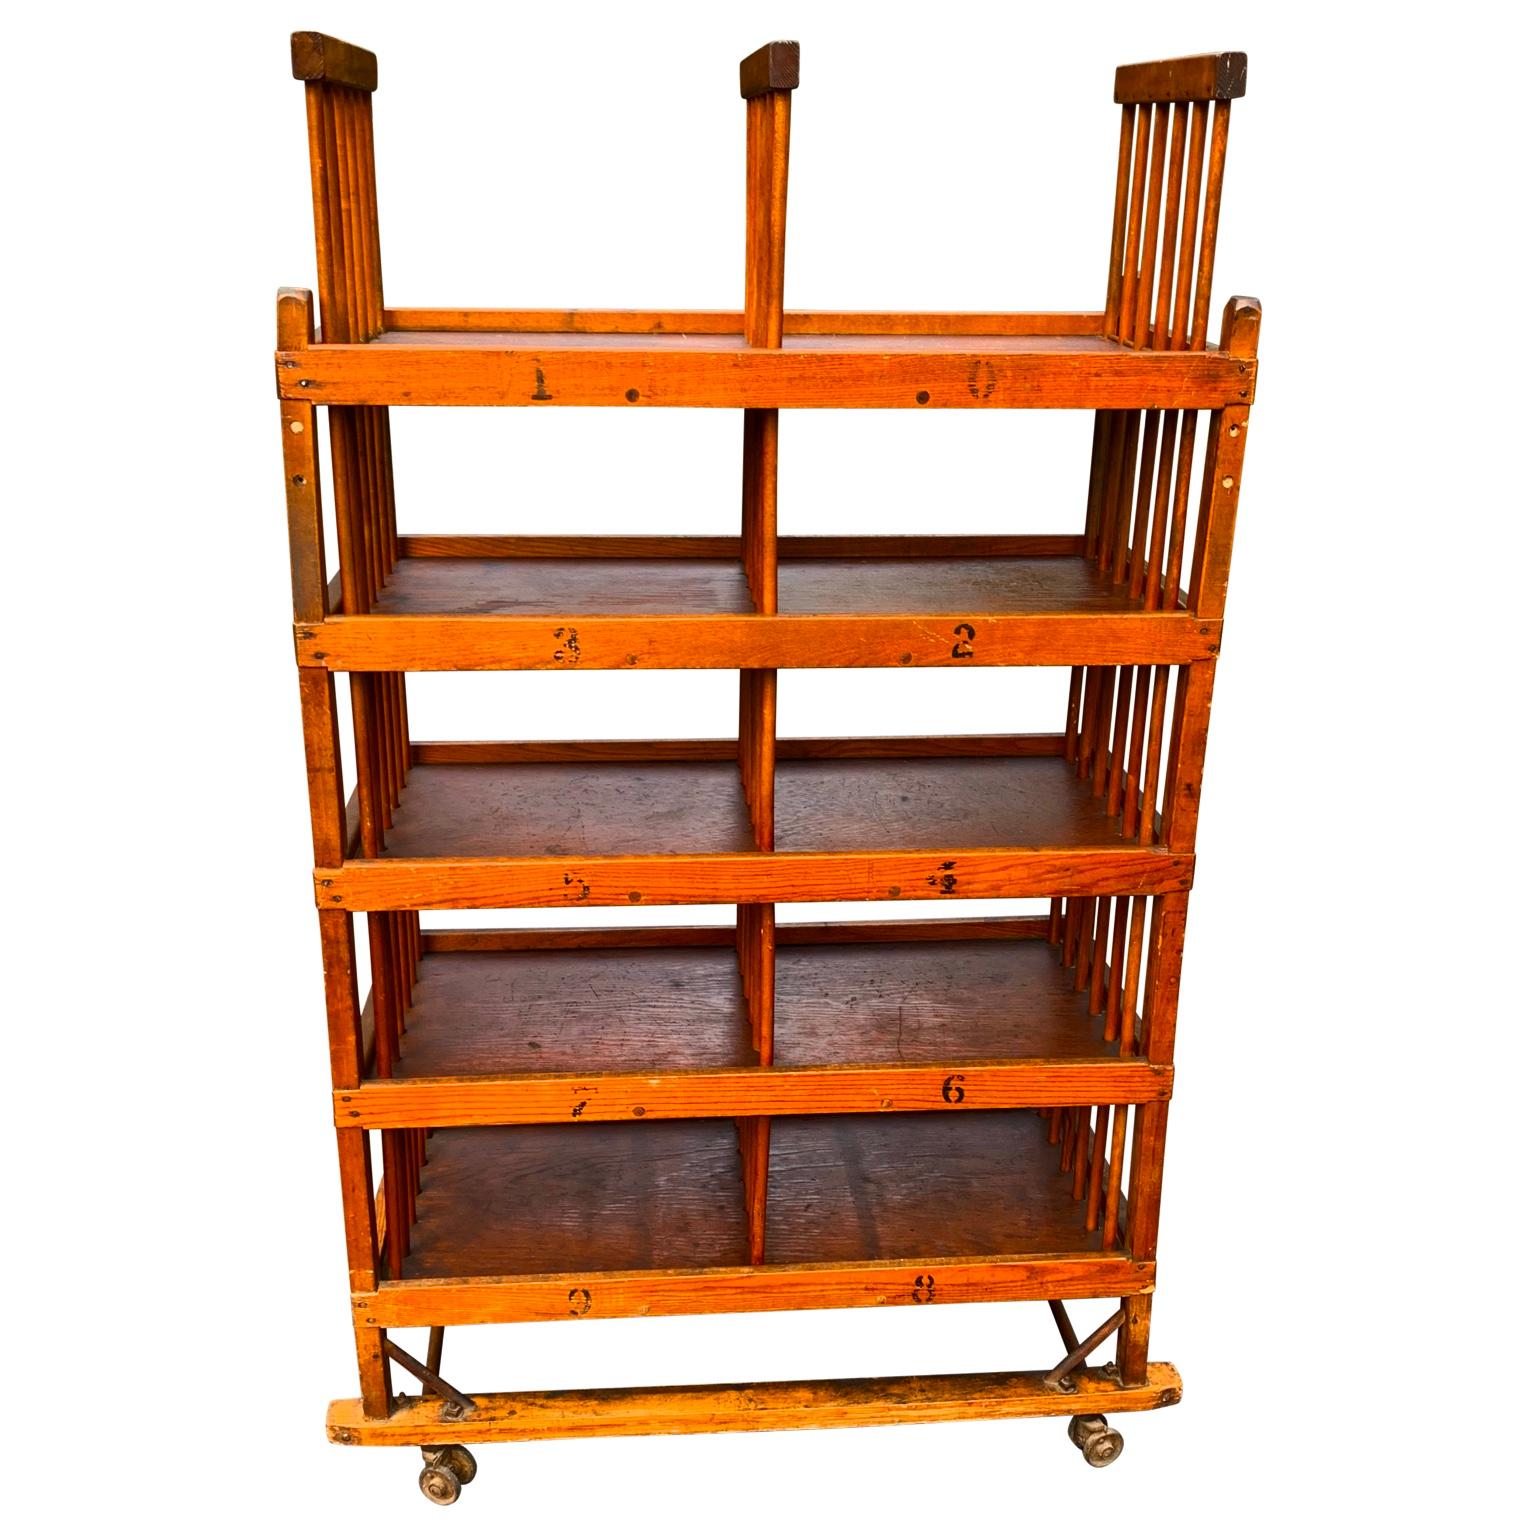 American 1960s wooden shelves, carts or bread racks on industrial iron wheels

Made by Middlesex MFG, Fifth Street, Medford, Mass.

2 shelves are currently available.